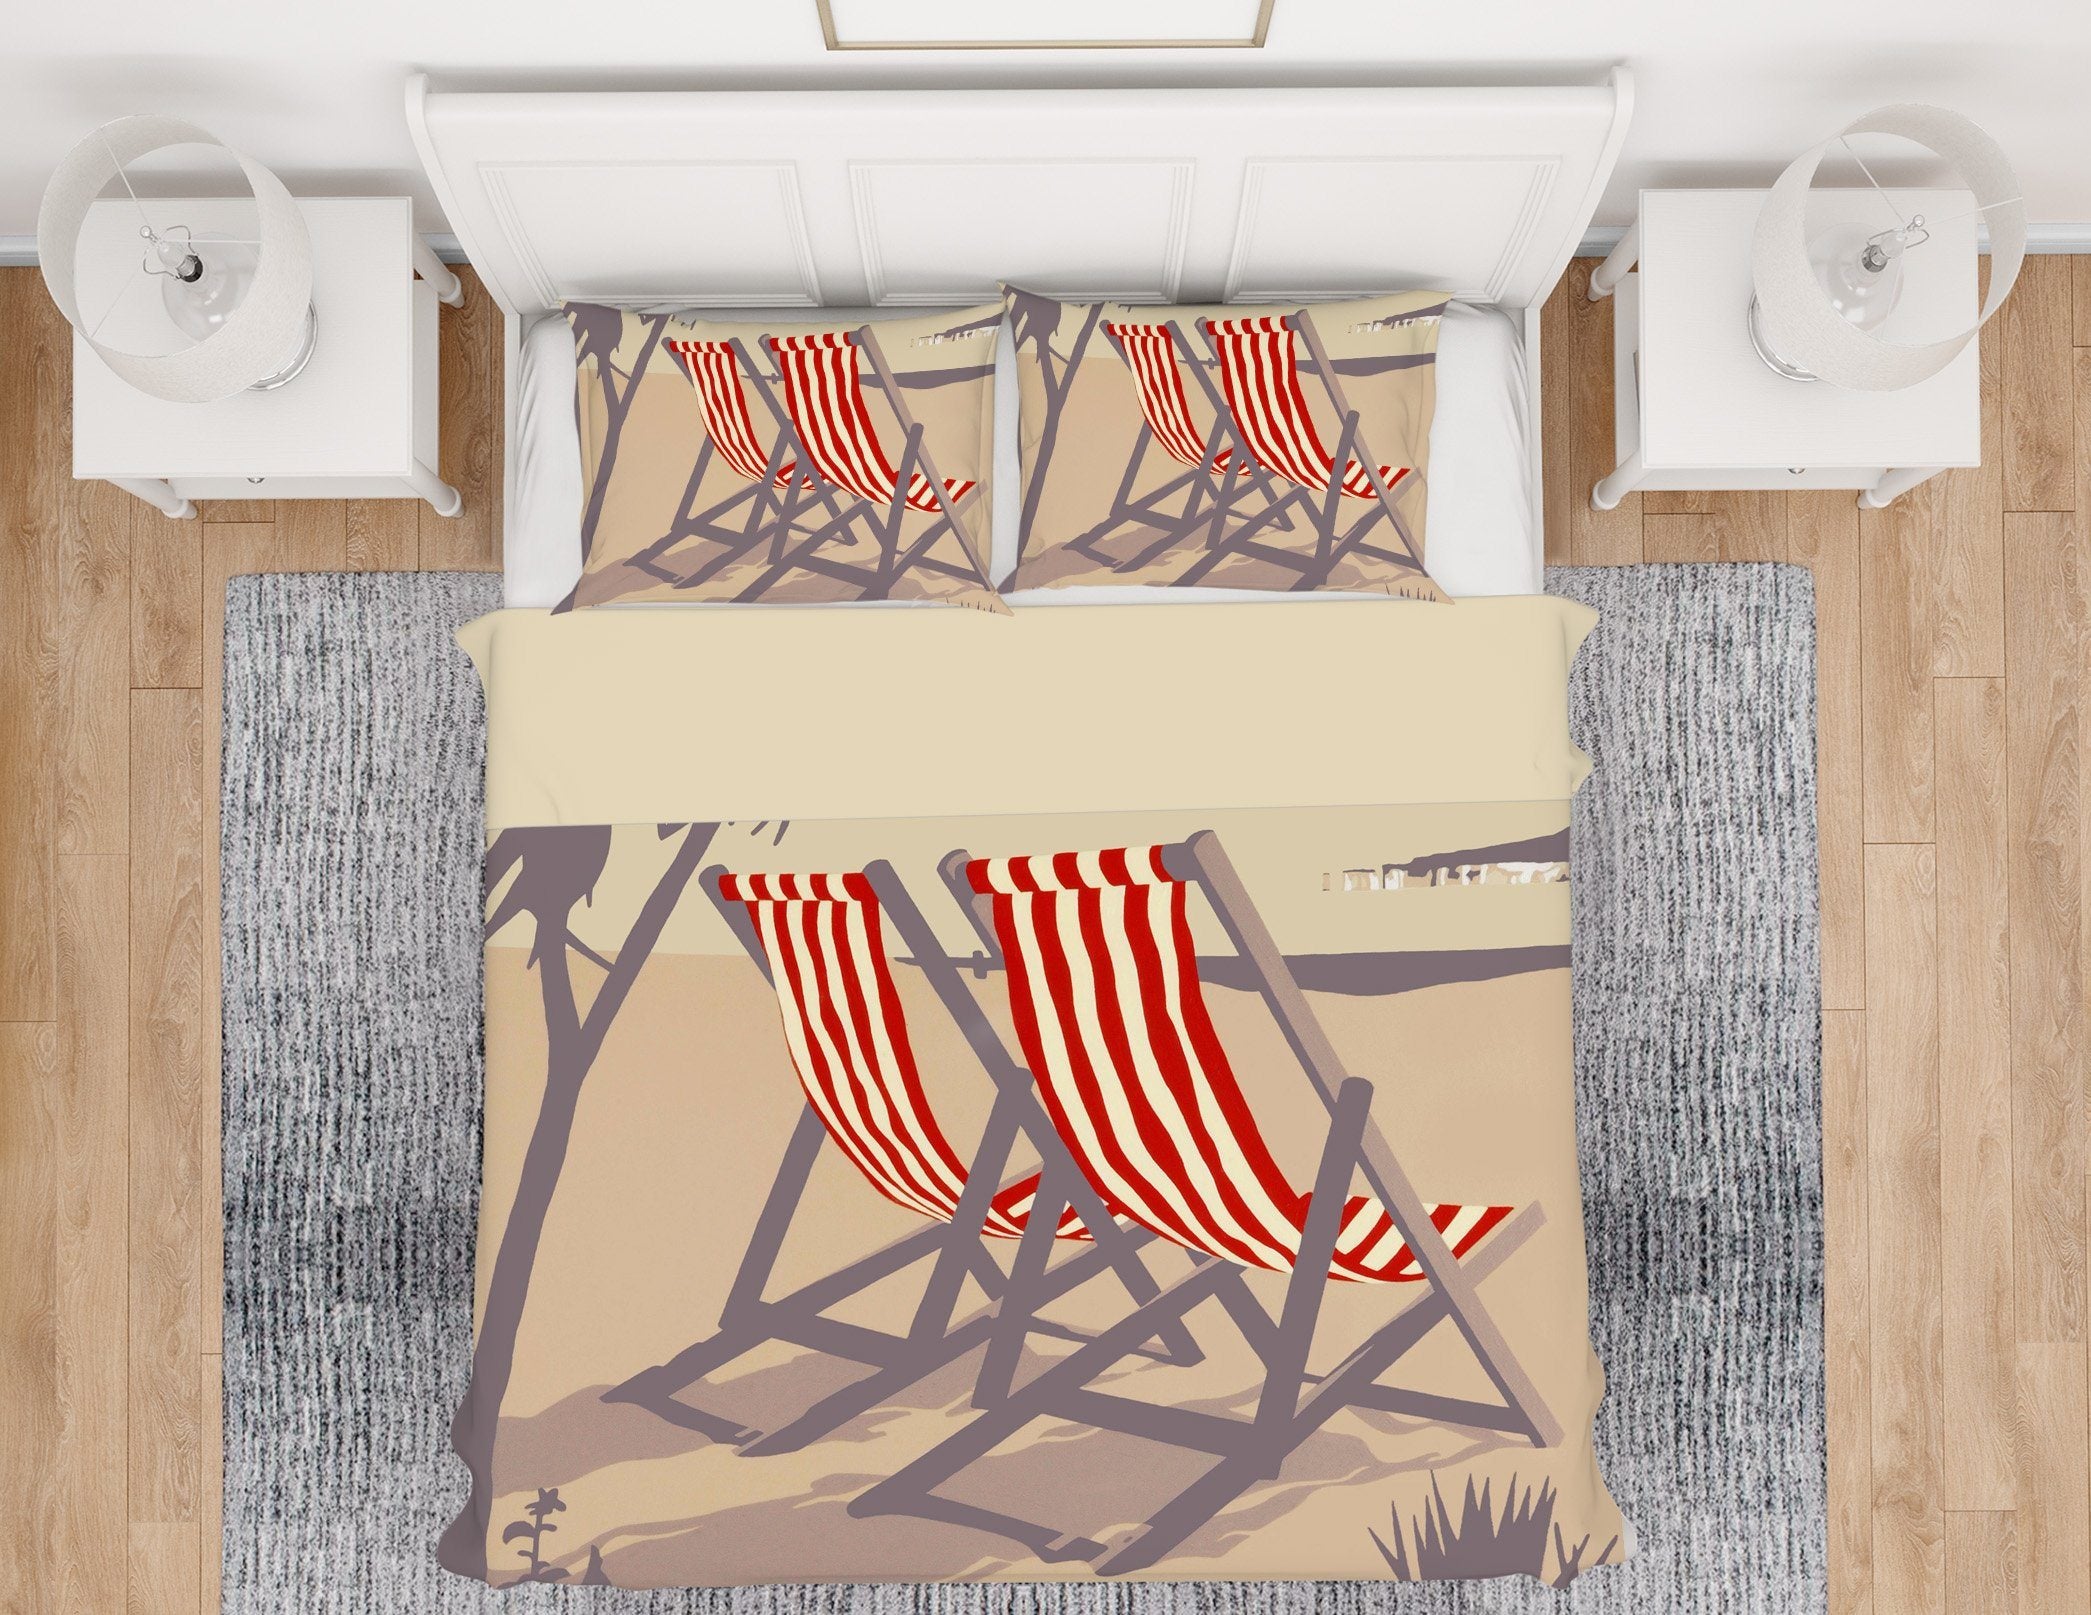 3D Bournemouth Red Deckchairs 2007 Steve Read Bedding Bed Pillowcases Quilt Quiet Covers AJ Creativity Home 